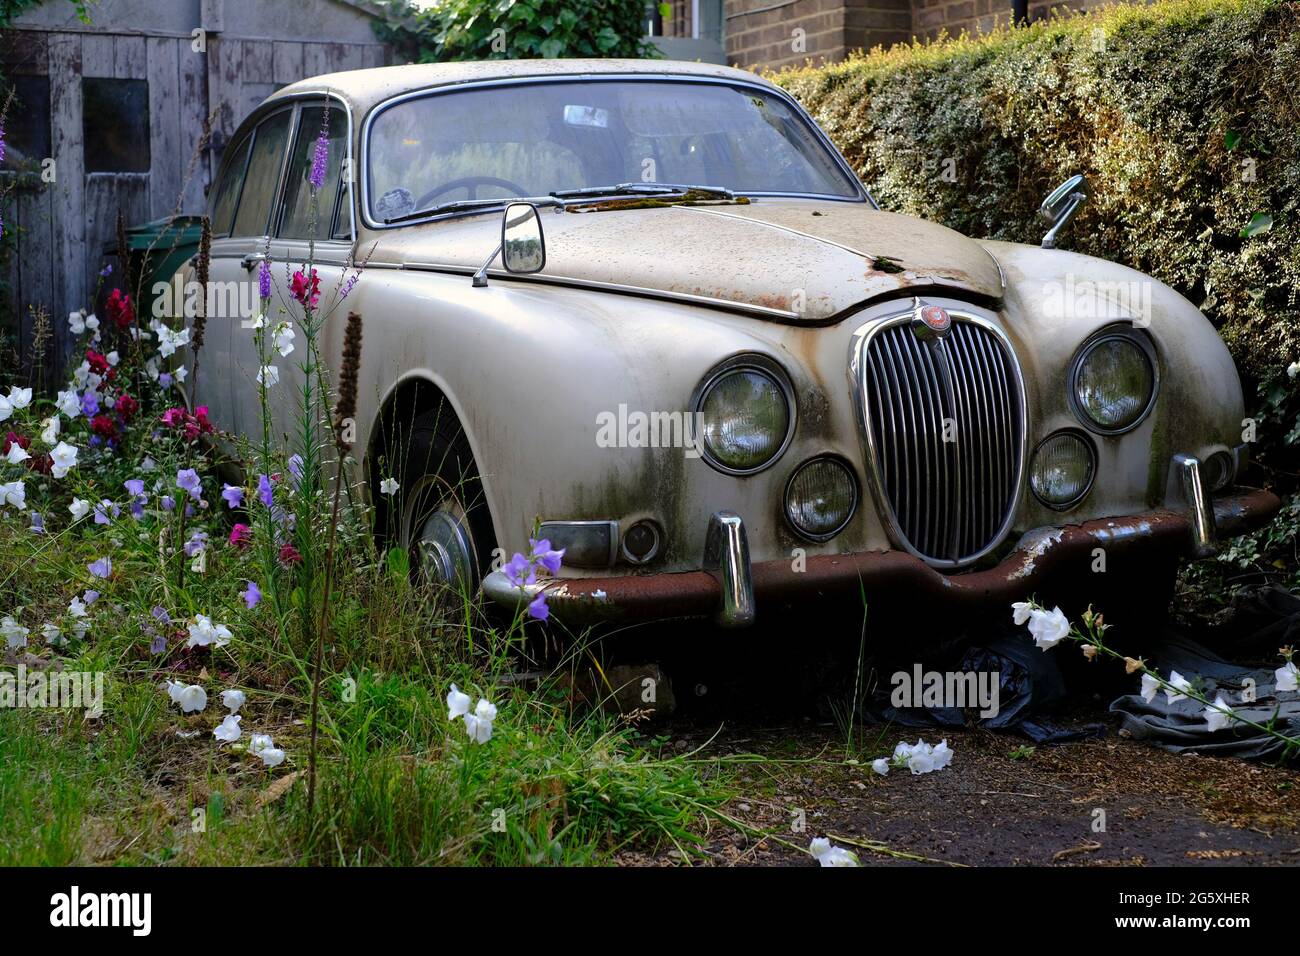 Silbey, Leicestershire, UK. 30th June 2021. A rotting Jaguar 3.4 S-Type sits on a driveway. The Jaguar S-Type saloon car was produced by Jaguar Cars i Stock Photo